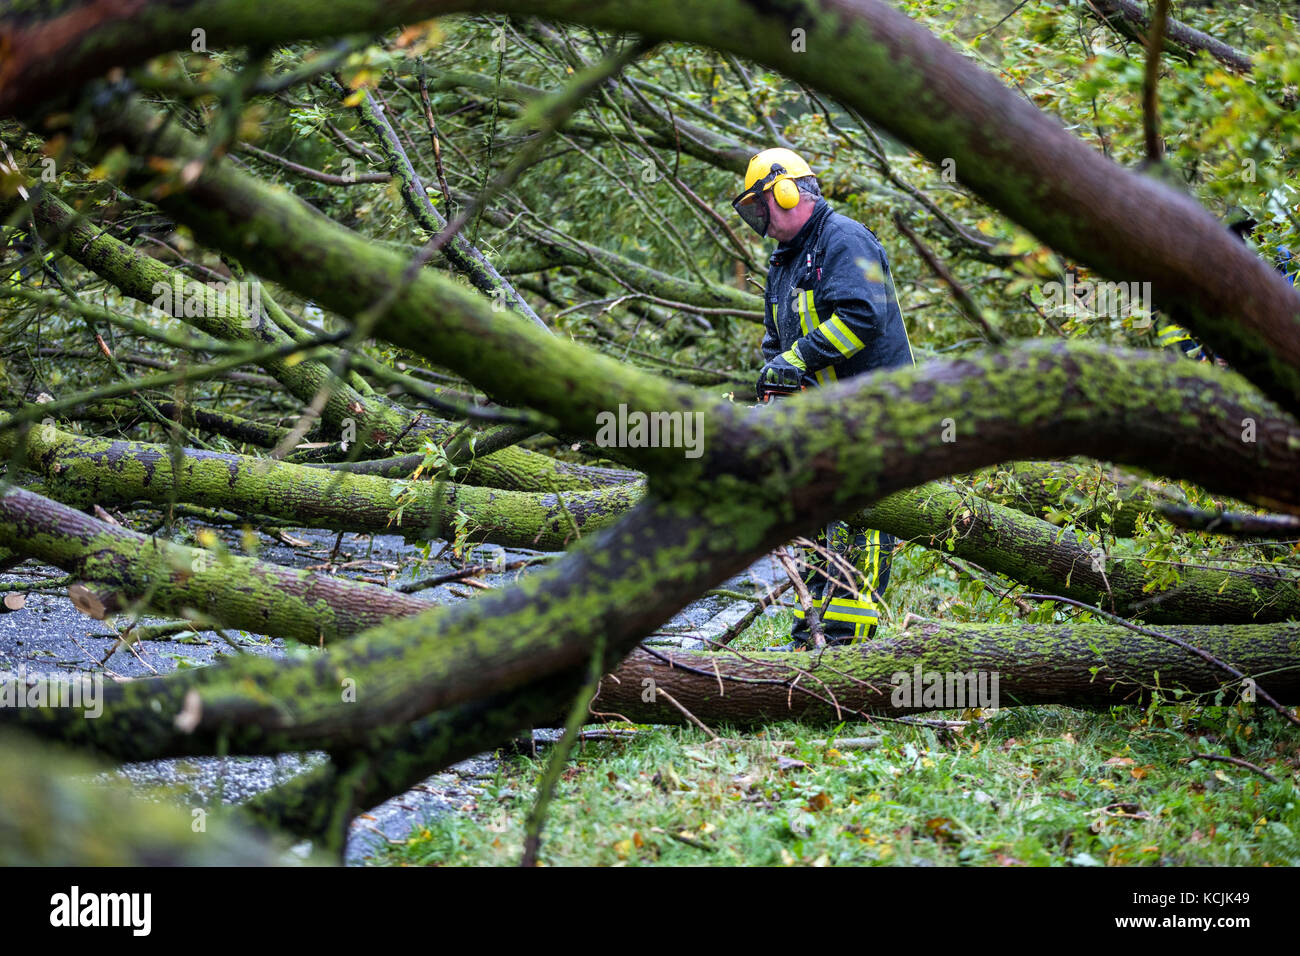 Wismar, Germany. 5th Oct, 2017. Several trees that fell in the storm are cleared off the road by the fire bridade near Wismar, Germany, 5 October 2017. The German Weather Service warns of orcan-like winds, falling trees and branches. Credit: Jens Büttner/dpa-Zentralbild/dpa/Alamy Live News Stock Photo